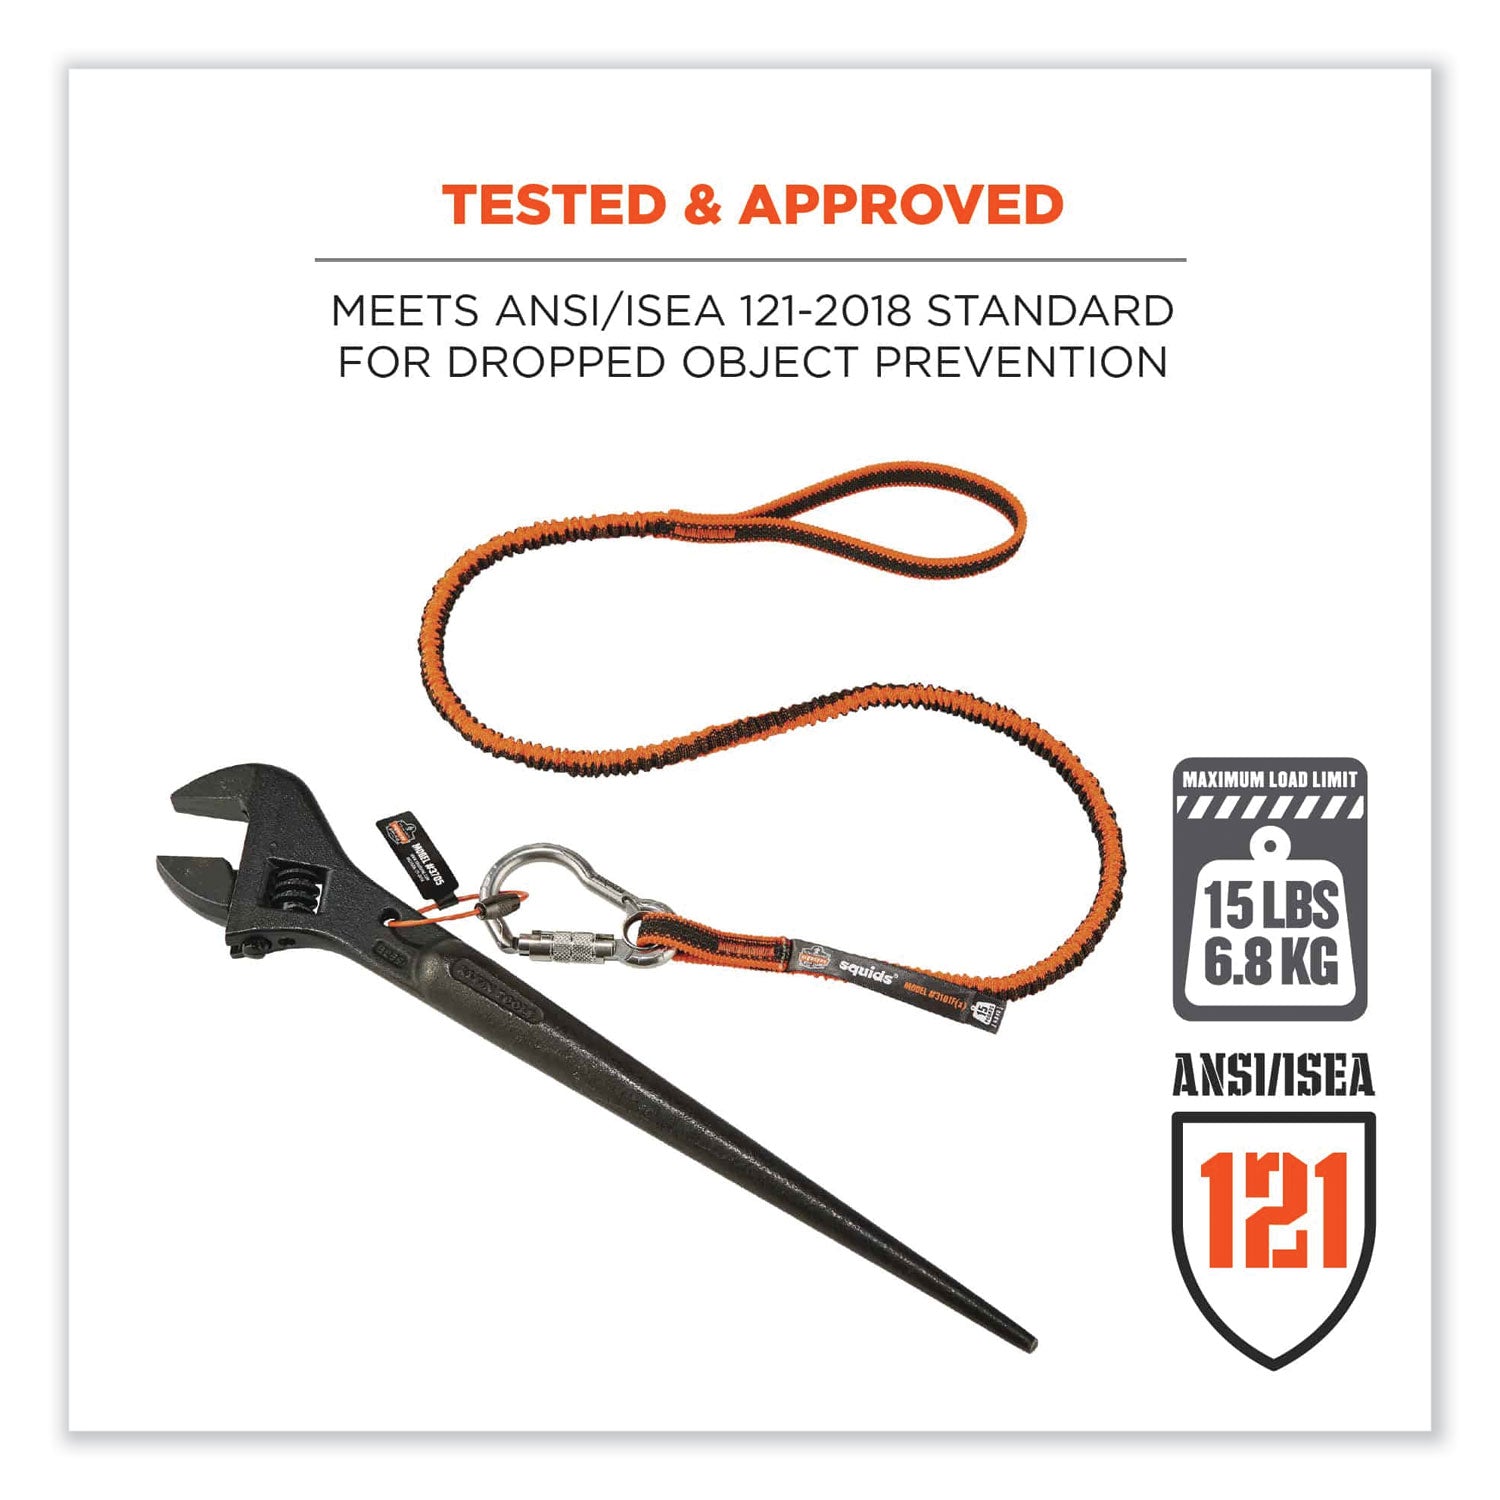 squids-3101fx-tool-lanyard-w-stainless-steel-carabiner-+-loop-15-lb-max-work-cap-38-to-48-ships-in-1-3-business-days_ego19803 - 3